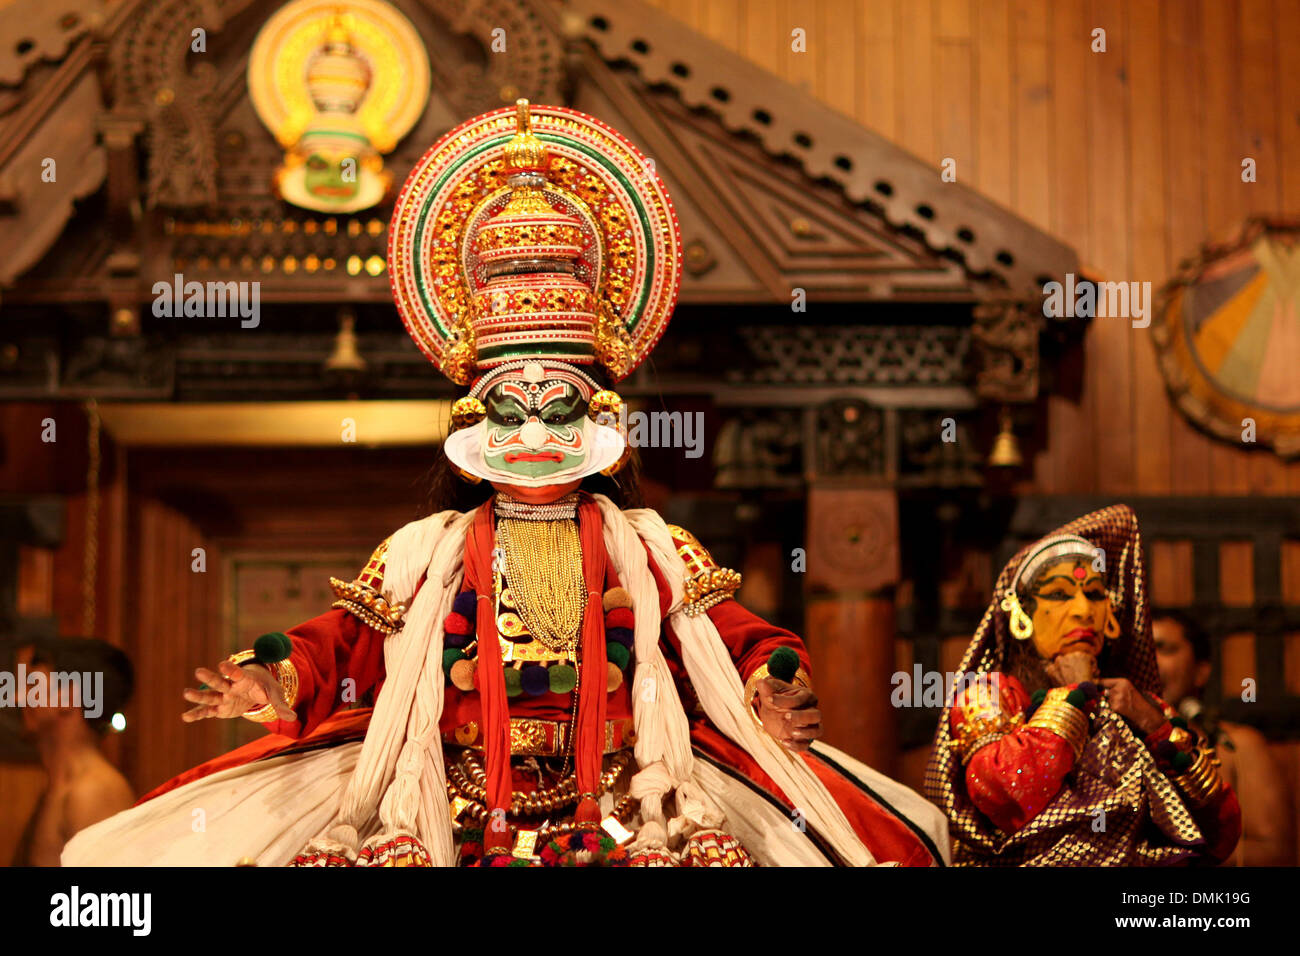 ACTORS FROM THE KATHAKALI DANCE THEATRE IN TRADITIONAL COSTUMES, COCHIN OR KOCHI, KERALA, SOUTHERN INDIA, INDIA, ASIA Stock Photo